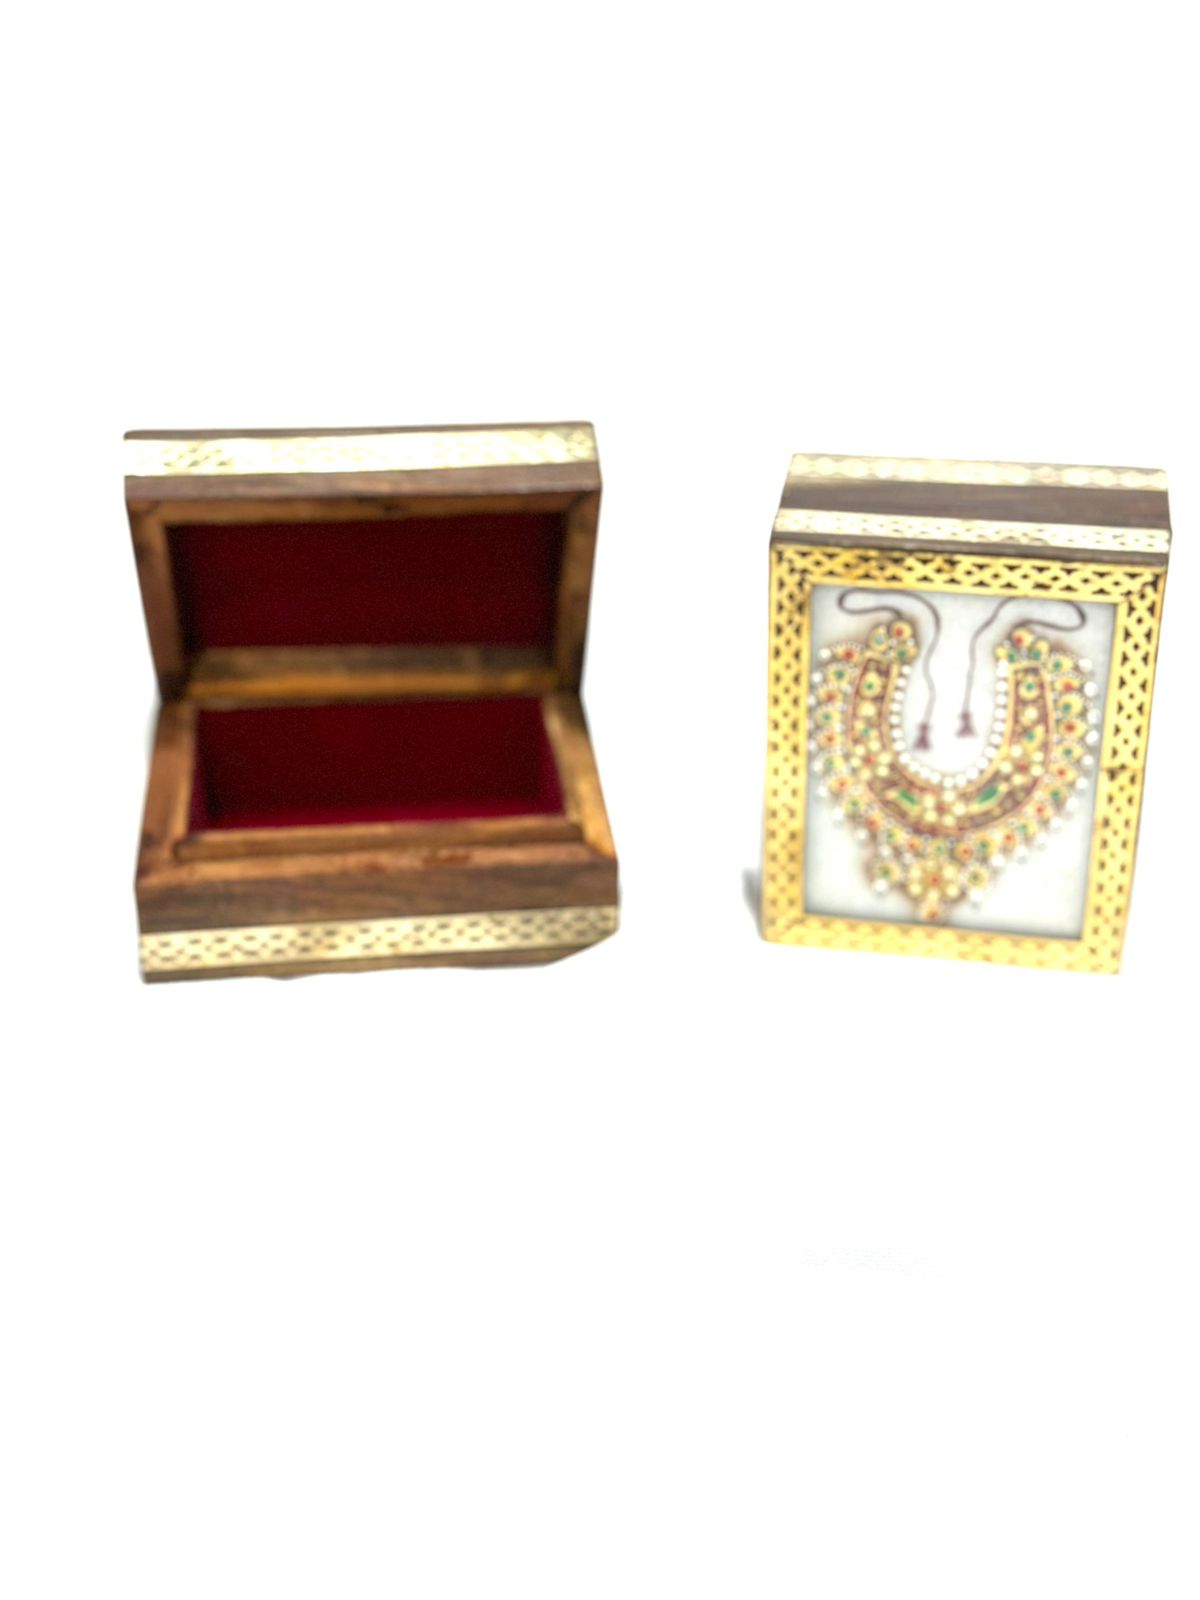 Marble Designer Royal Jewelry Wooden Box Storage Gifting's By Tamrapatra